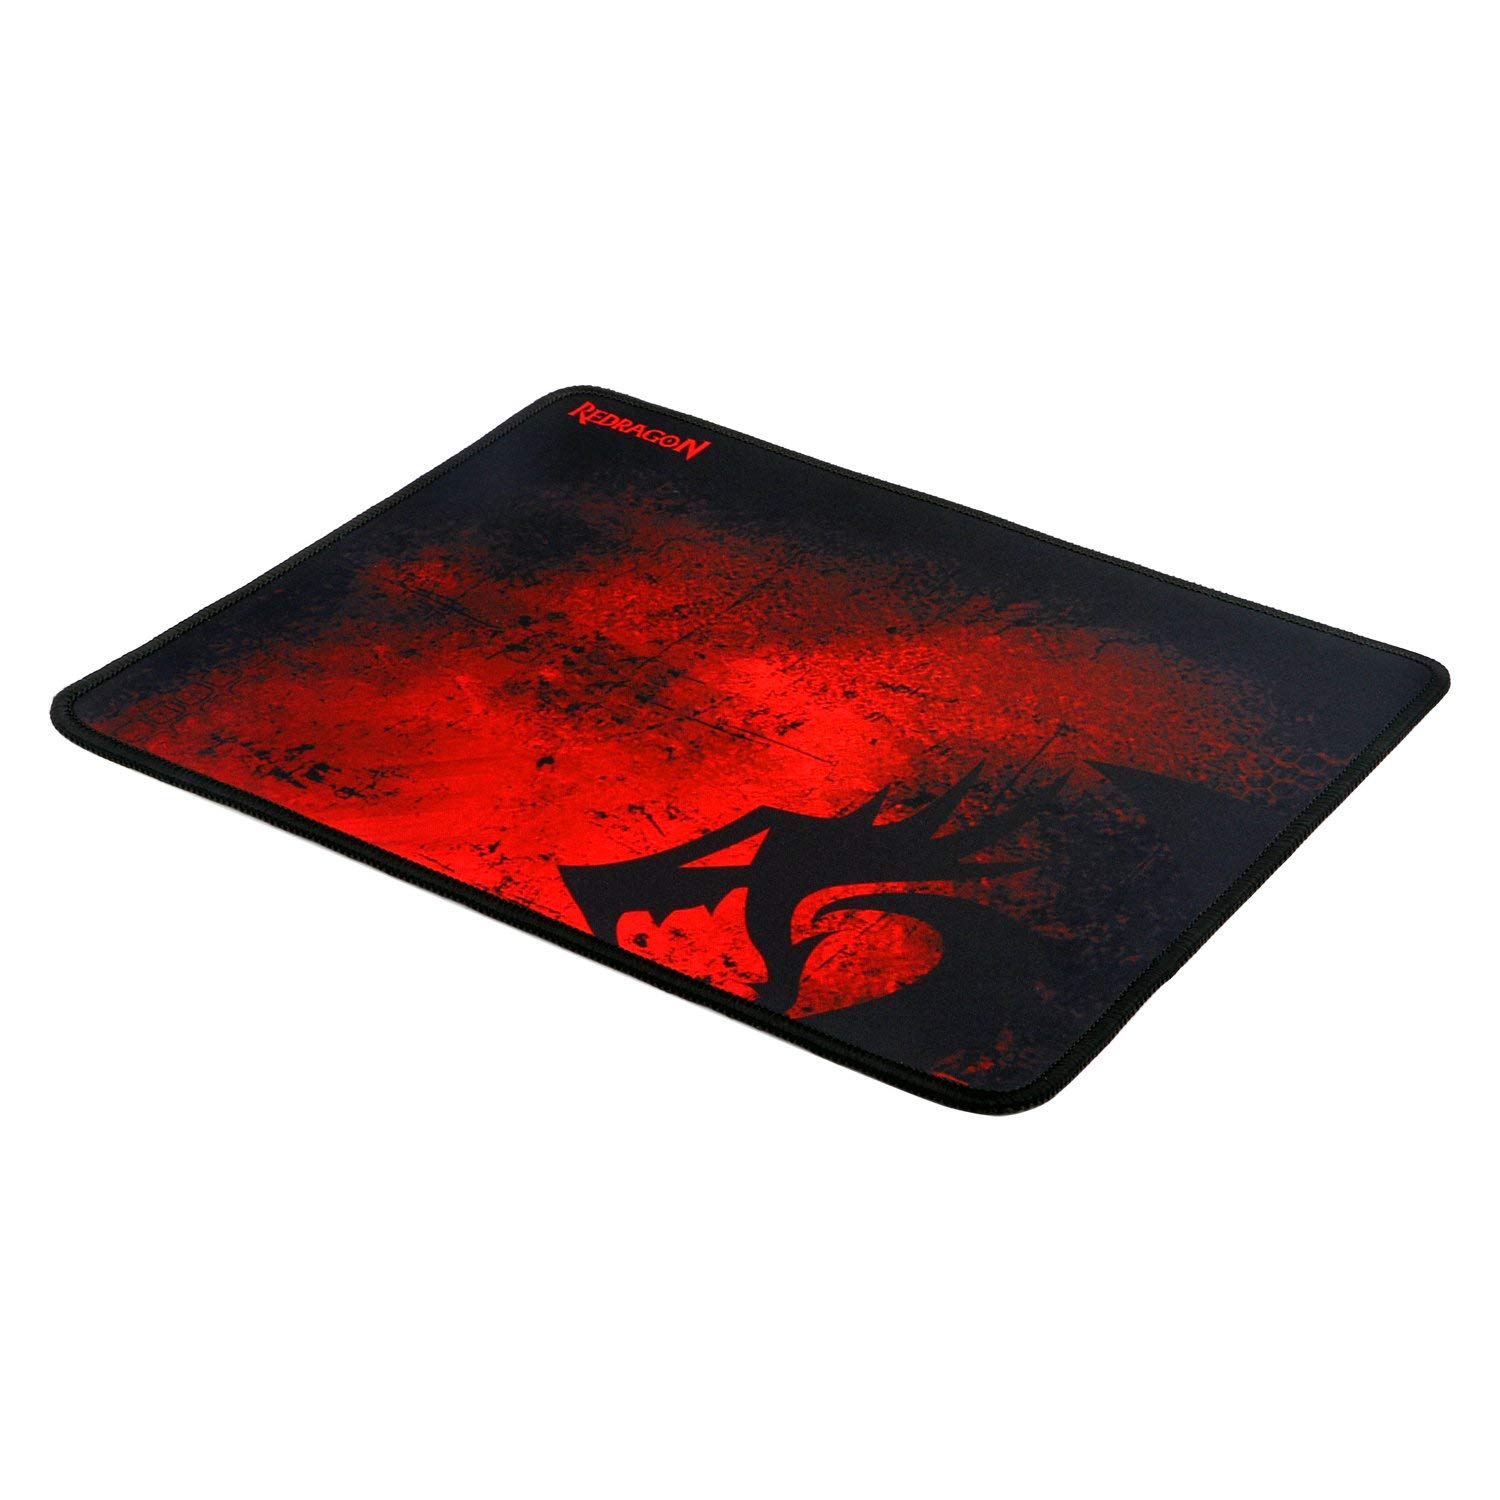 redragon-pisces-gaming-mouse-pad-330x260x3mm-2-image